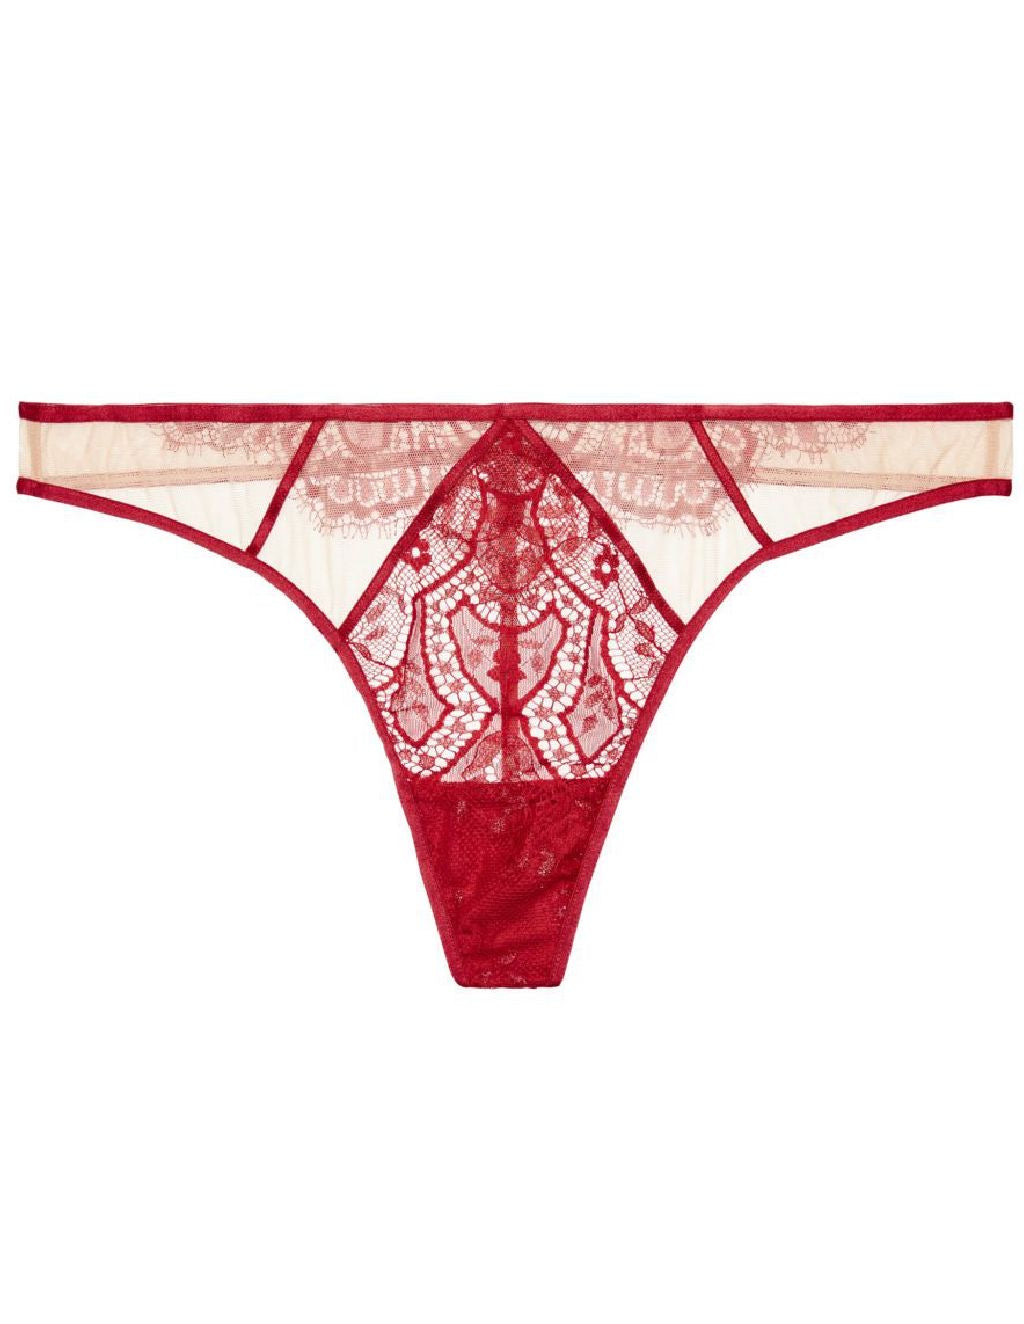 Maestra Red Thong - Last chance to buy! (L)